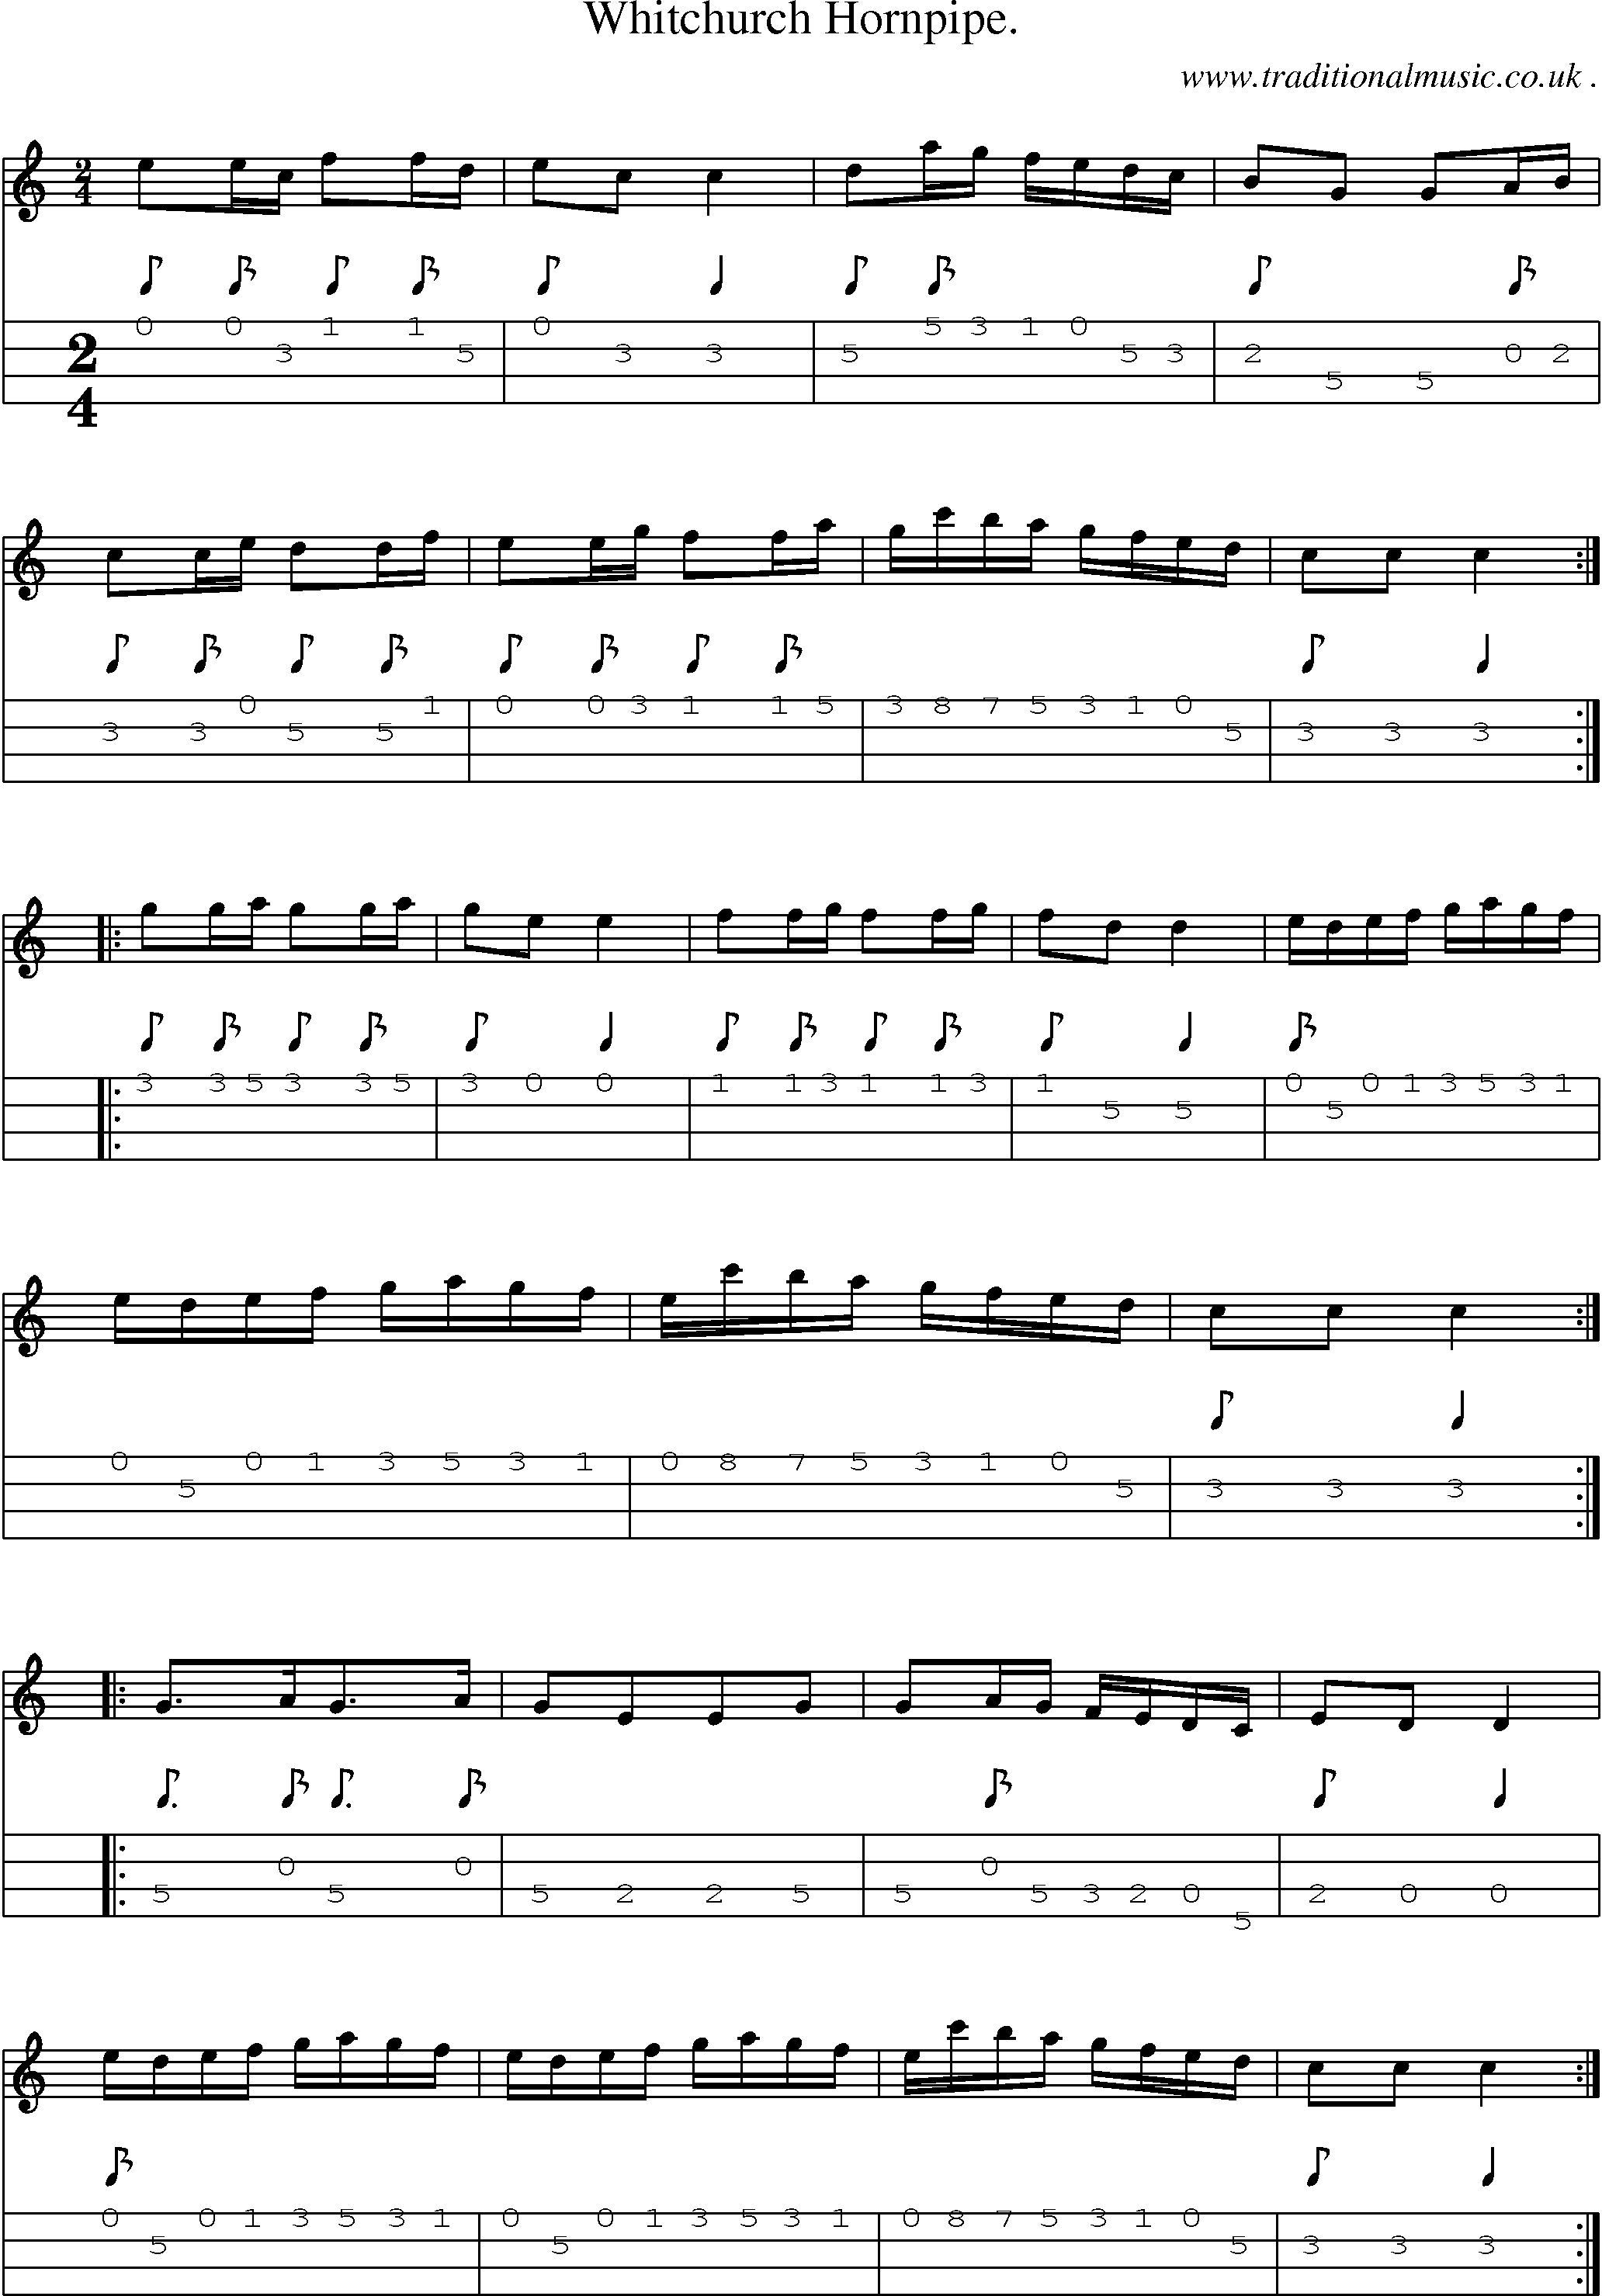 Sheet-Music and Mandolin Tabs for Whitchurch Hornpipe